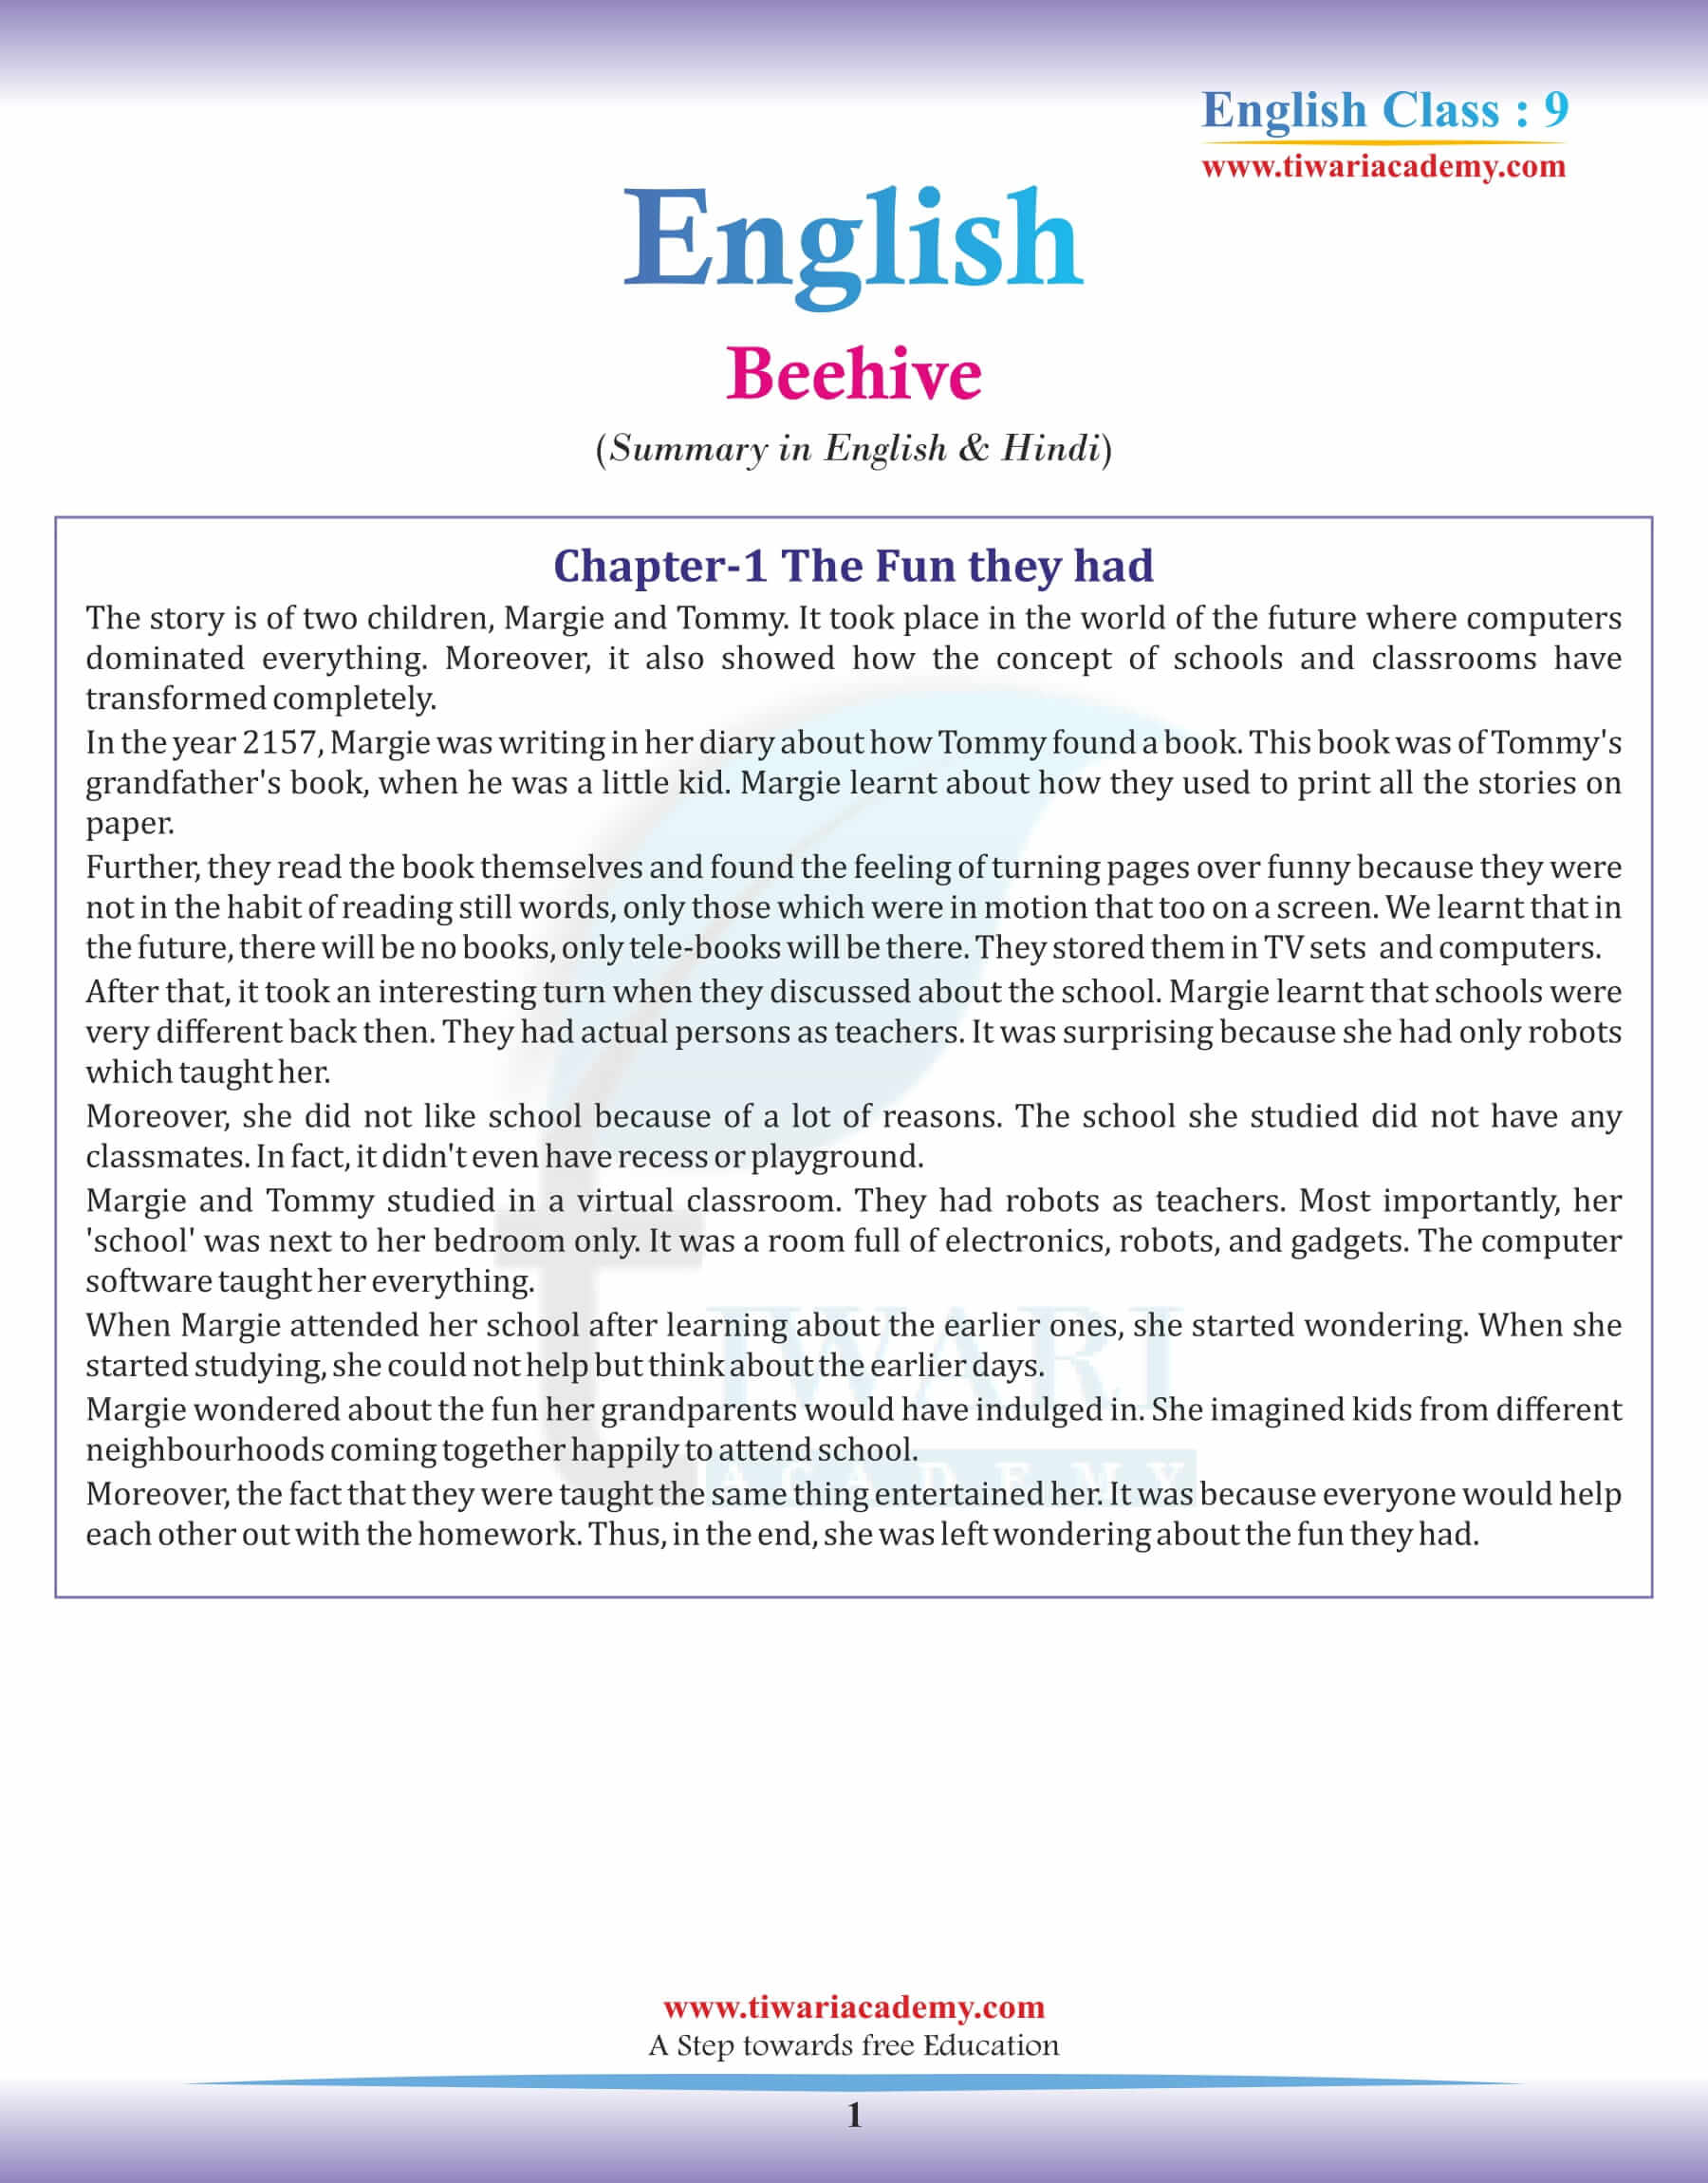 9th English Beehive Chapter 1 Summary in English